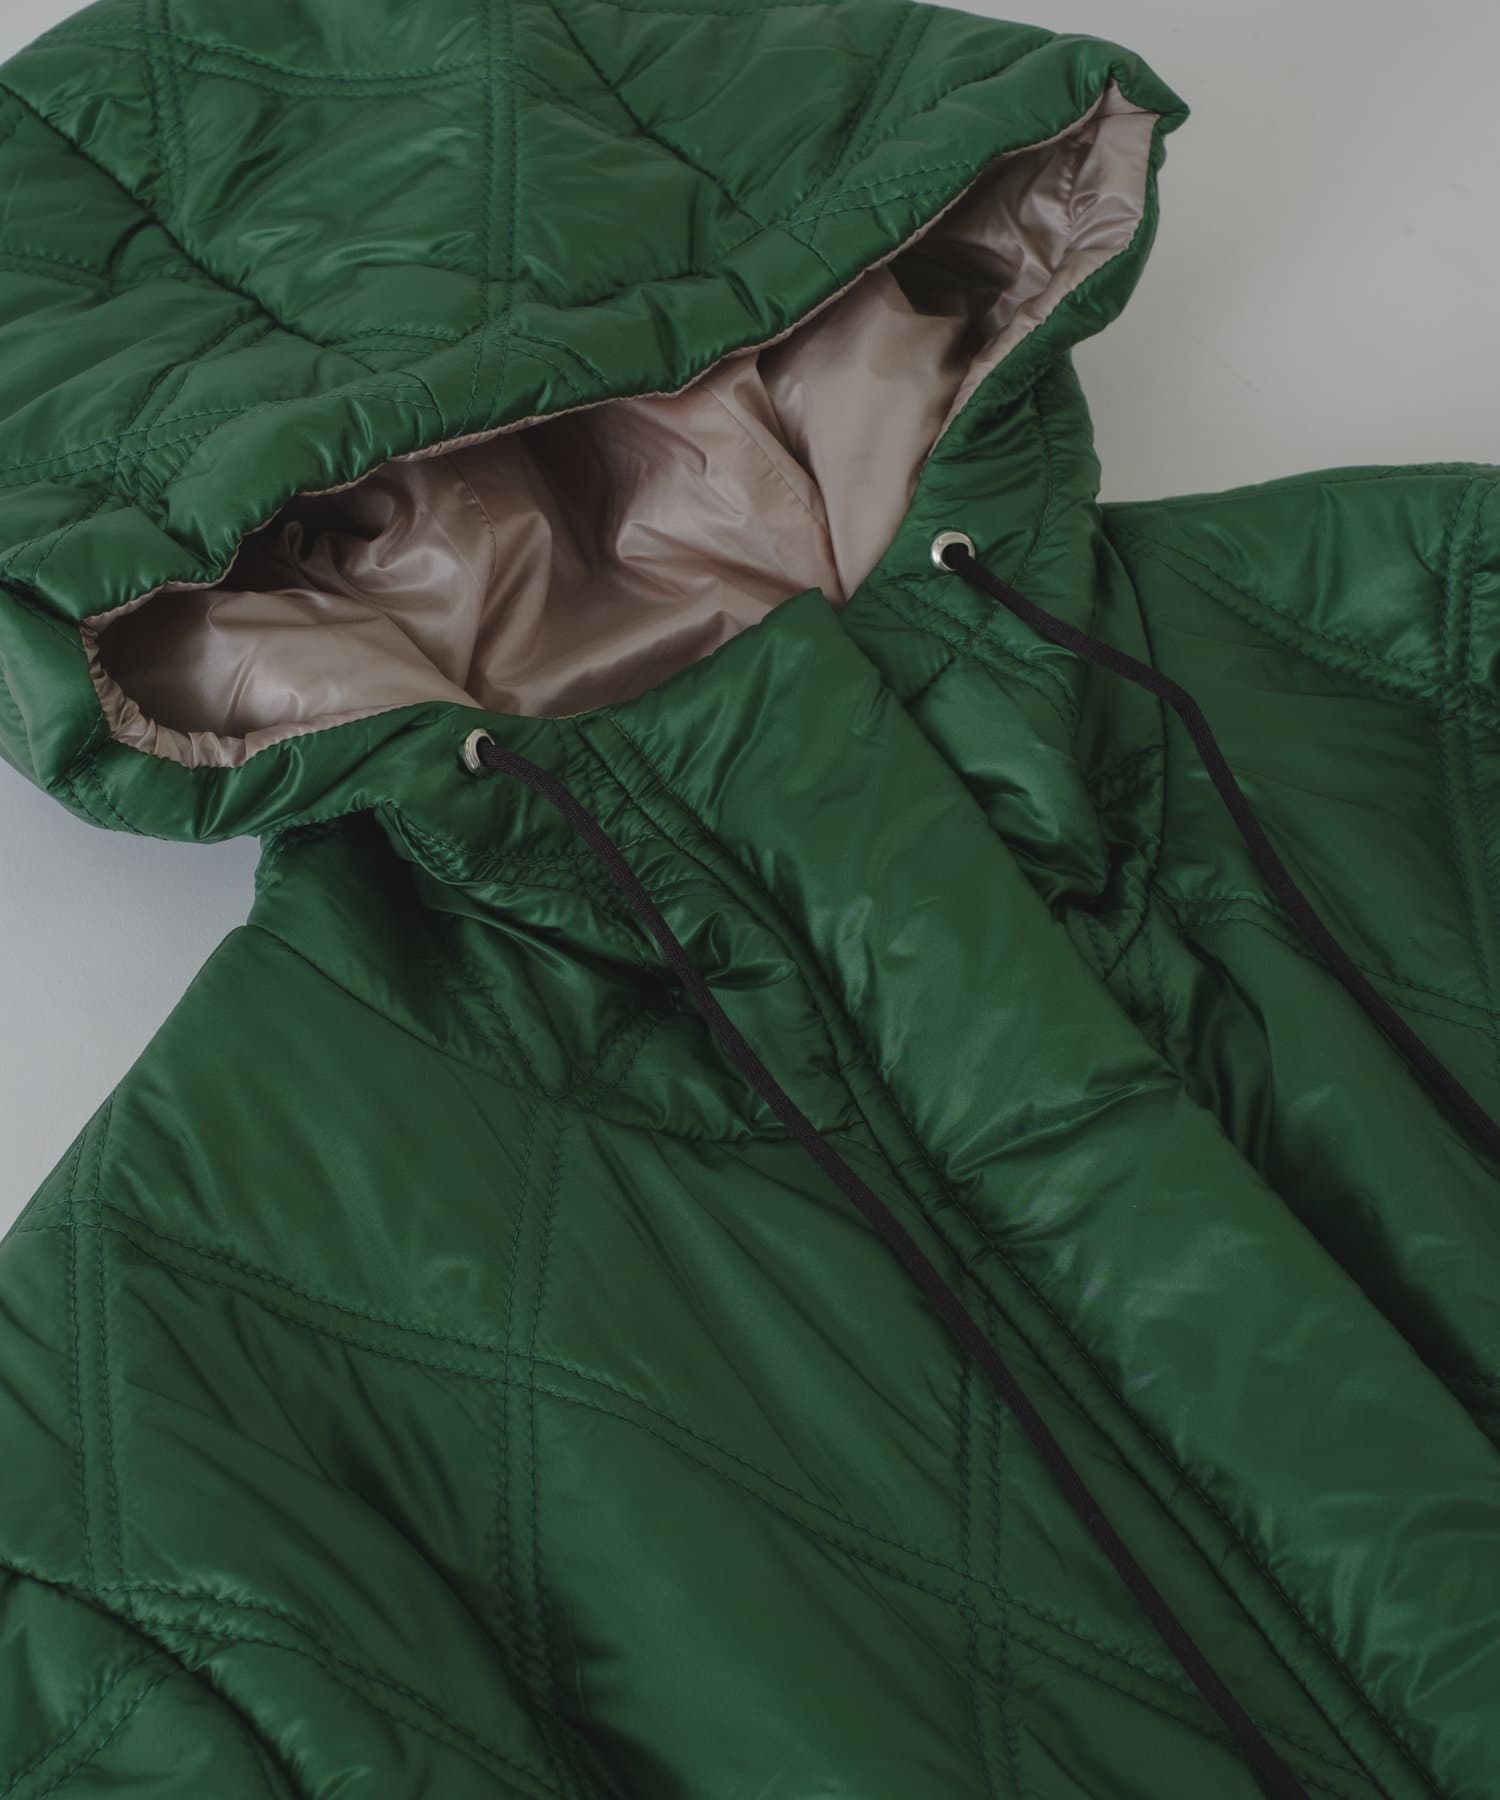 OUTLET(アウトレット) 【Pasterip】Insulation quilting jacket